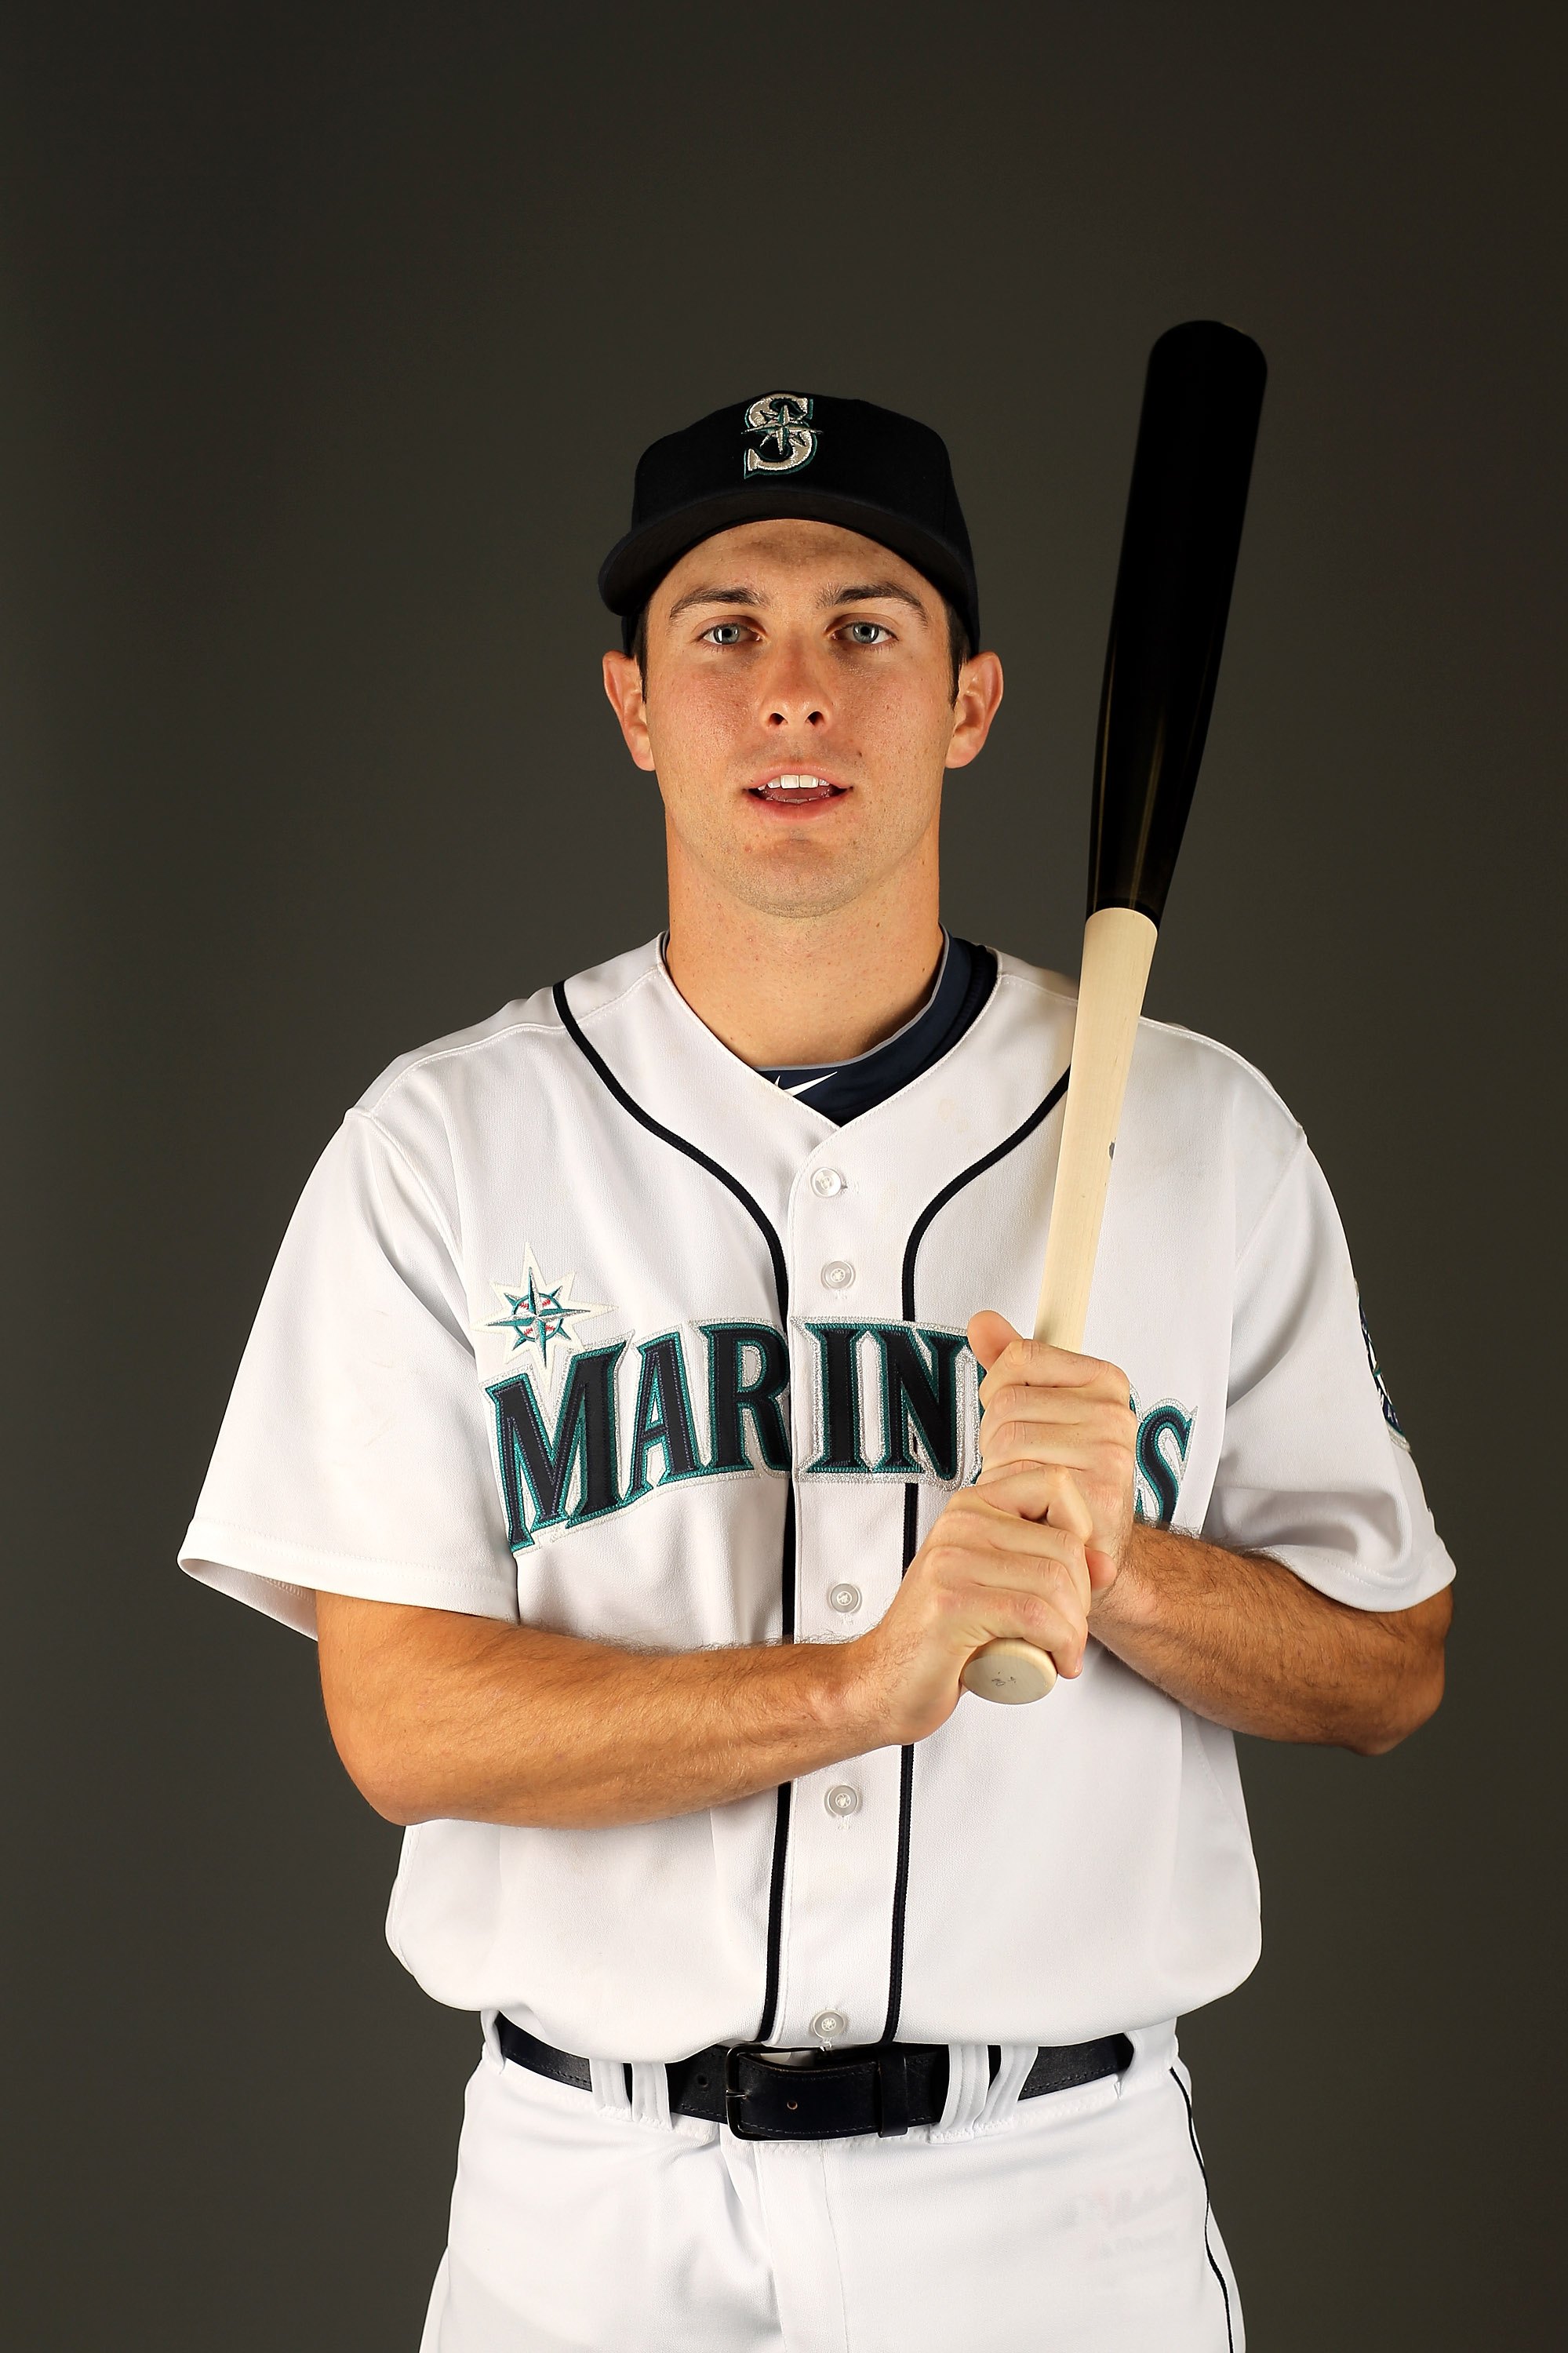 PEORIA, AZ - FEBRUARY 25:  Dustin Ackley of the Seattle Mariners poses during photo media day at the Mariners spring training complex on February 25, 2010 in Peoria, Arizona.  (Photo by Ezra Shaw/Getty Images)